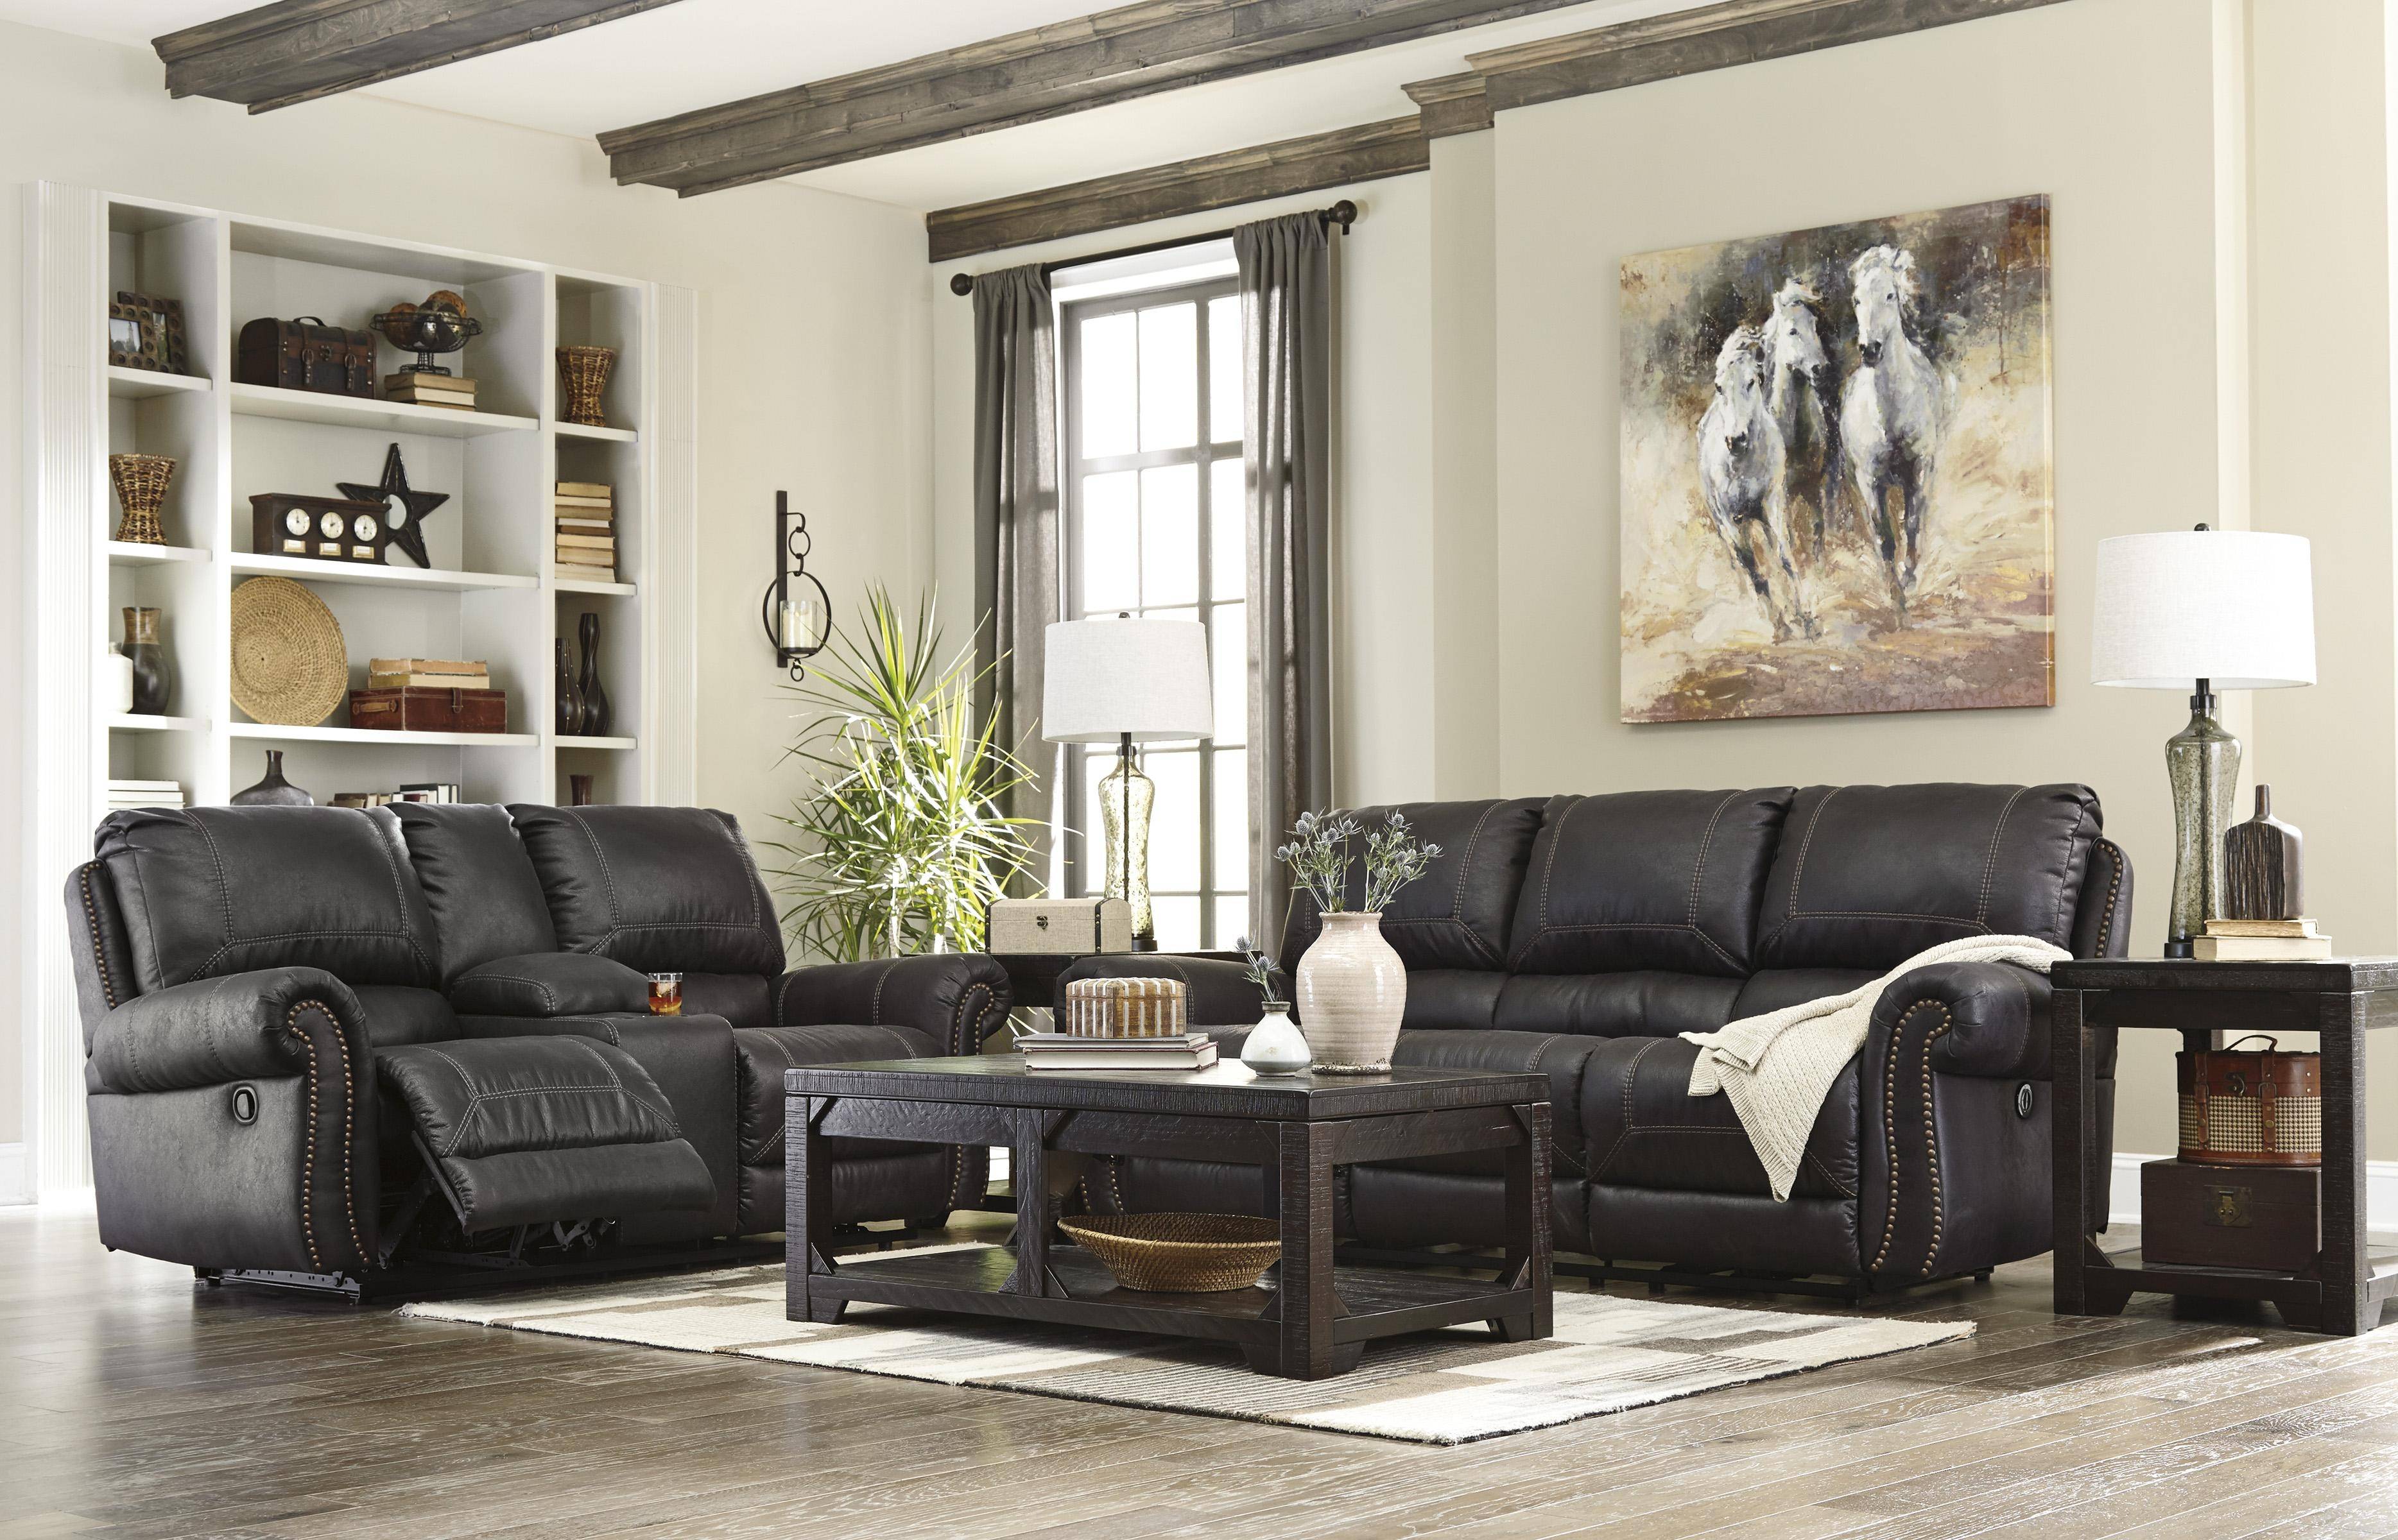 Bobs Furniture Living Room Sets - This set has bonded leather